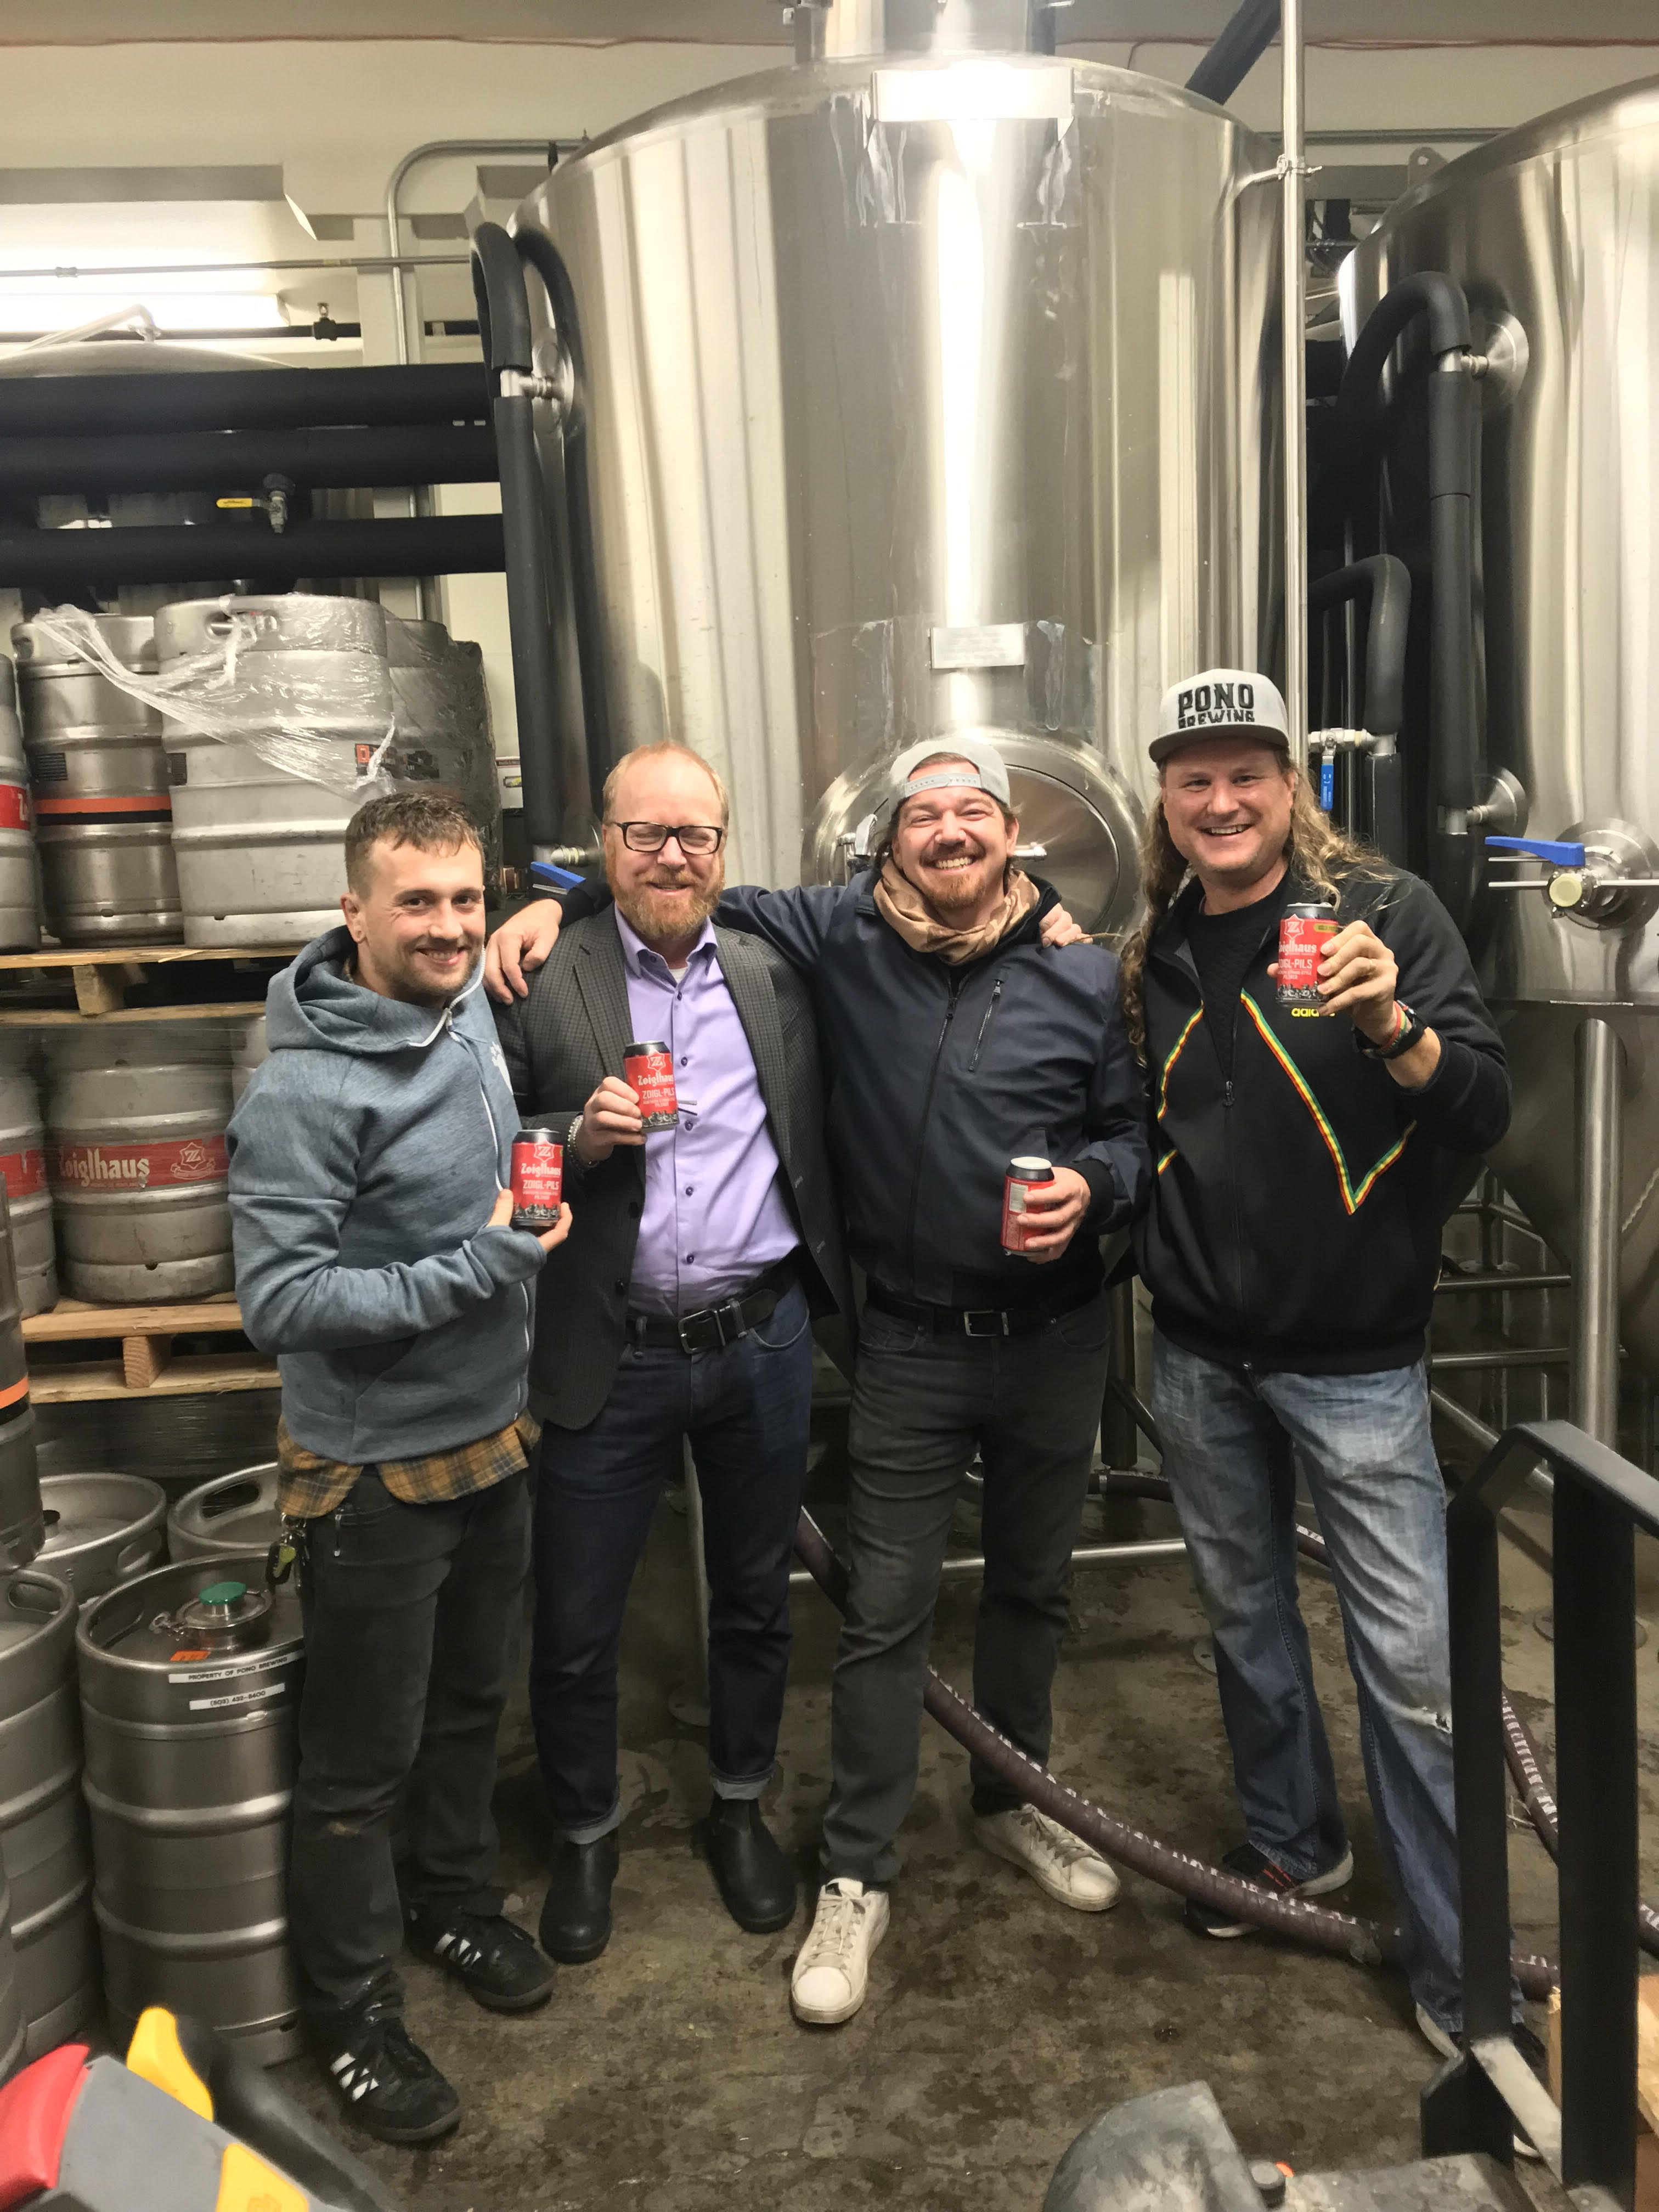 Matthew Jarrell, Director of Culinary Operations at Paley Hospitality, Garrett Peck, Director of Operations at Paley Hospitality and Erick Russ and Larry Clouser, Co-Owners of Pono Brewing during brew day for Bushel & A Peck IPA.